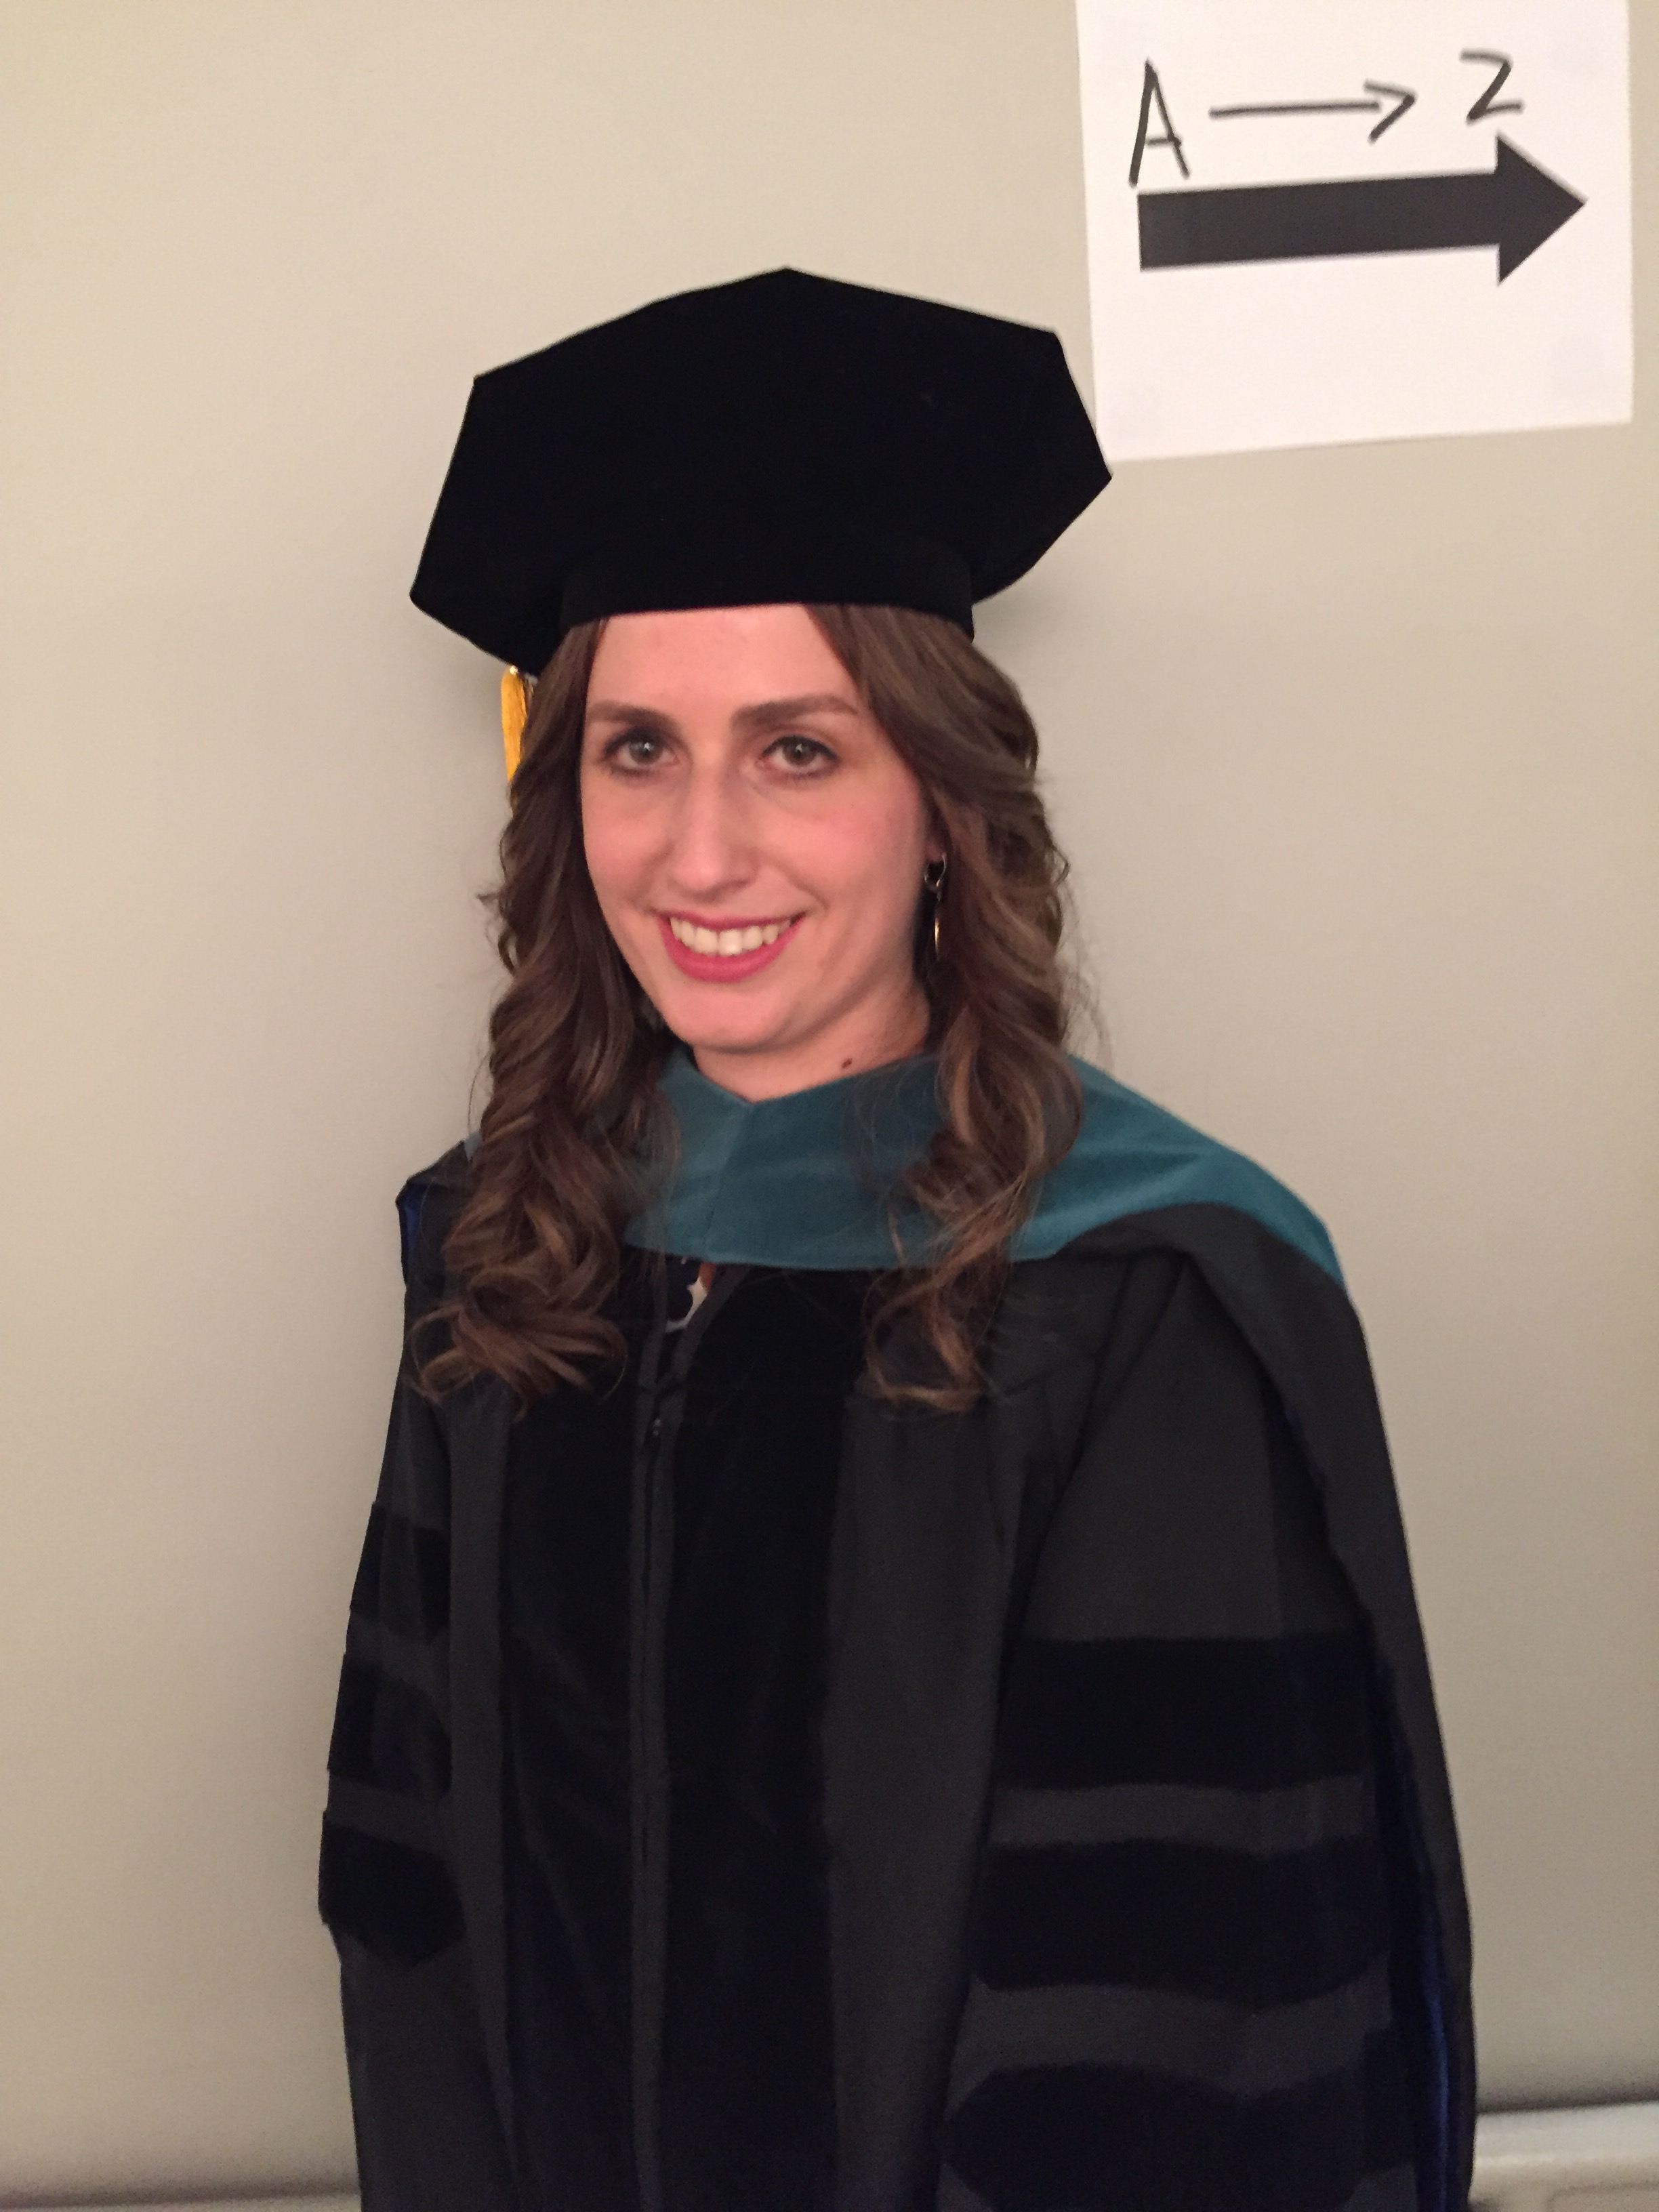 Lea Krasnow, class of 2016, graduate of the School of Health Sciences Doctor of Physical Therapy Program